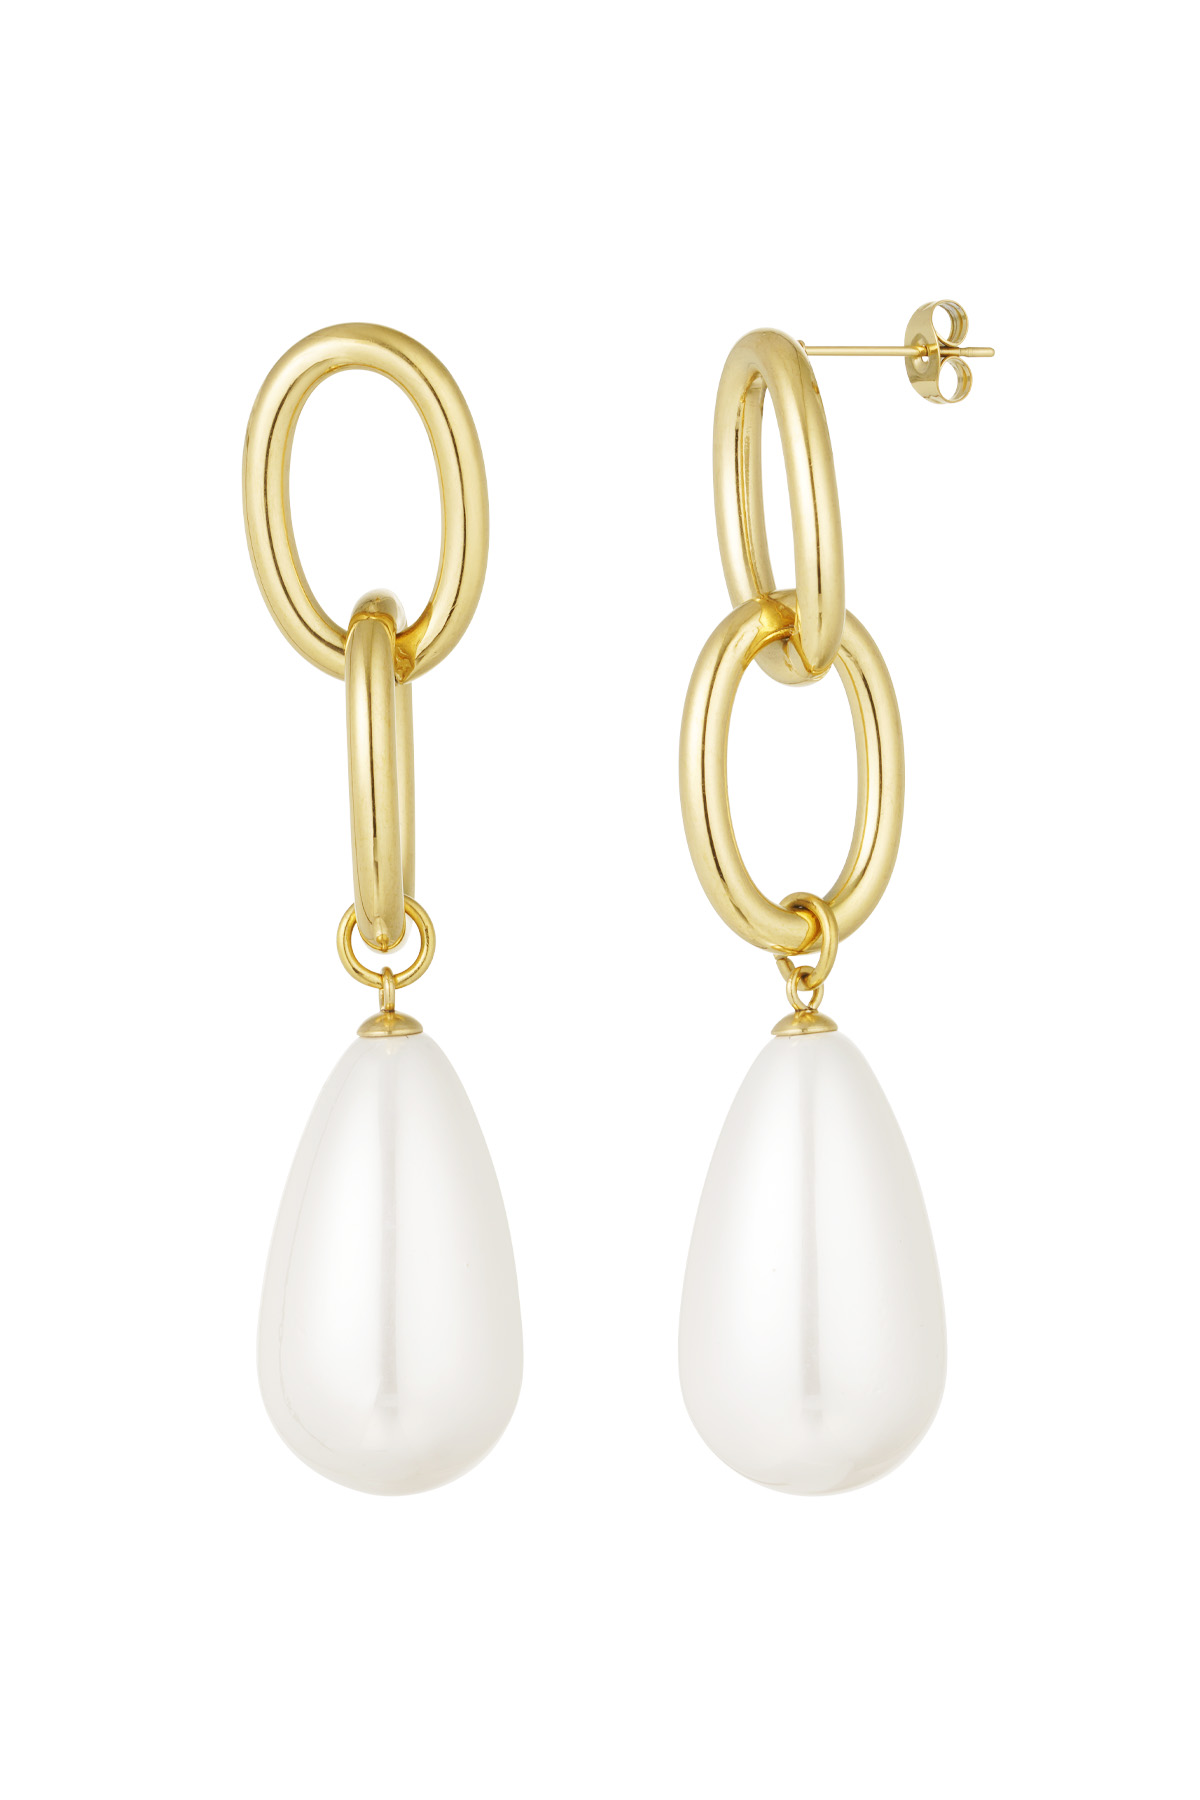 Ring earring with pearl pendant - gold h5 